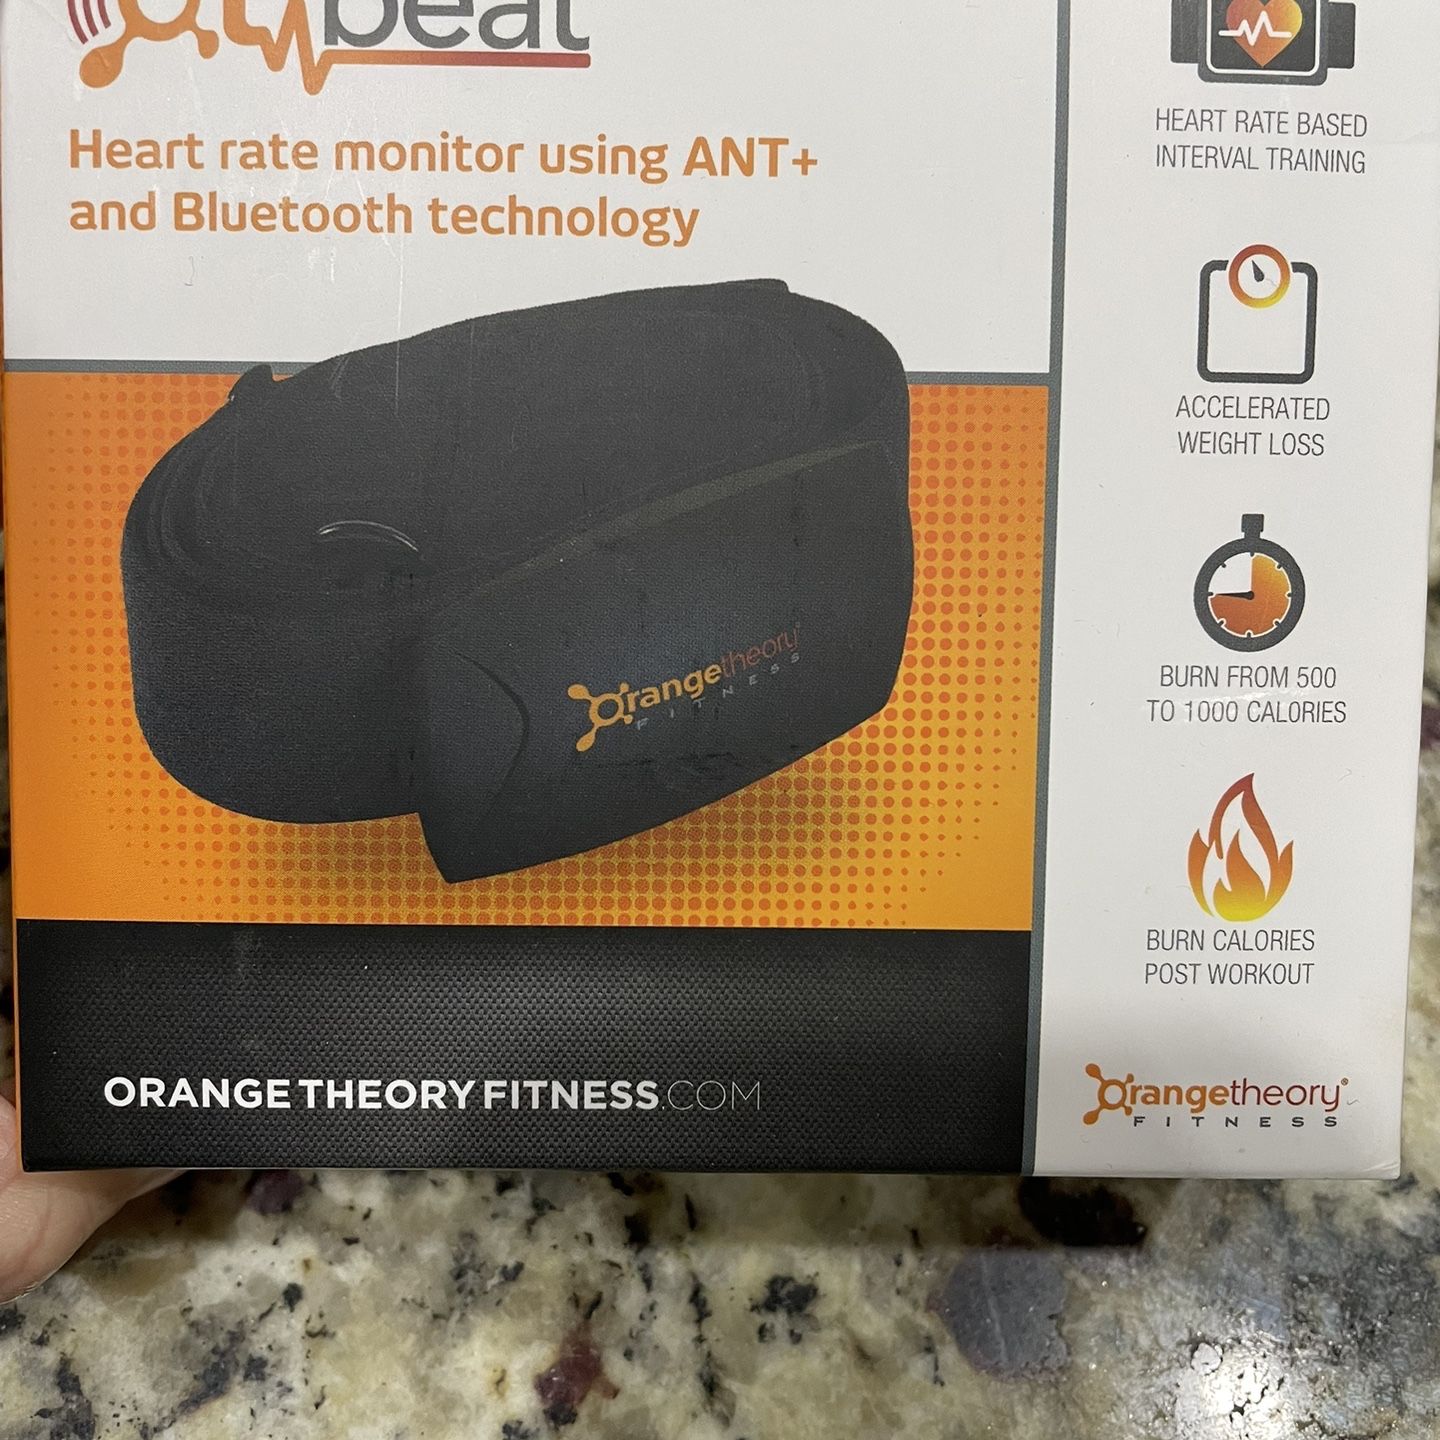 Orange Theory Heart Rate Monitor Excellent Used Condition